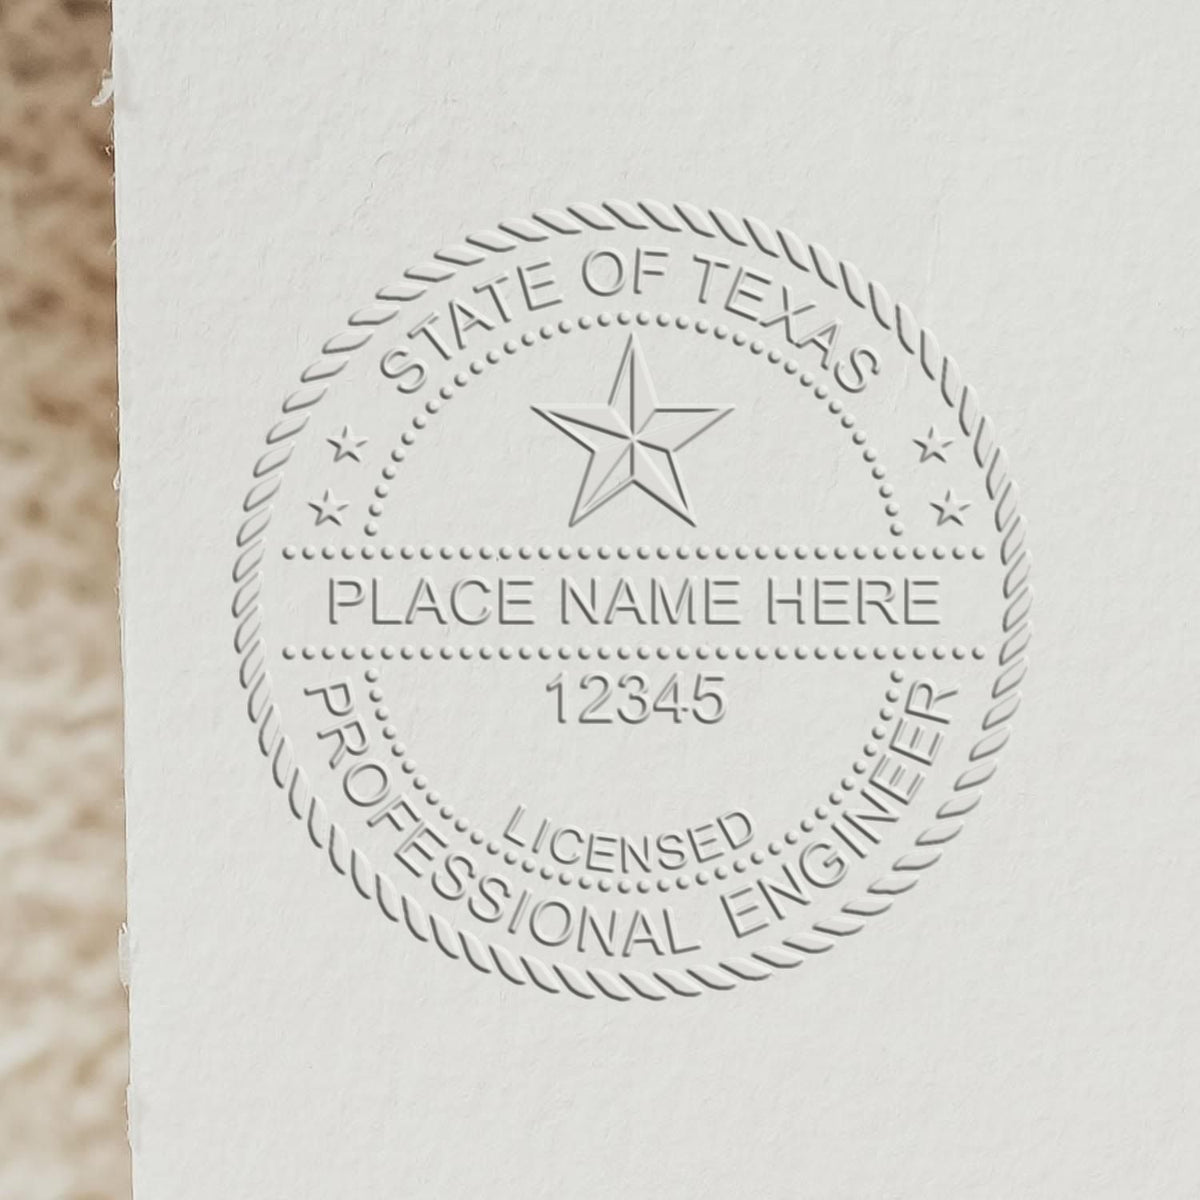 A photograph of the Texas Engineer Desk Seal stamp impression reveals a vivid, professional image of the on paper.